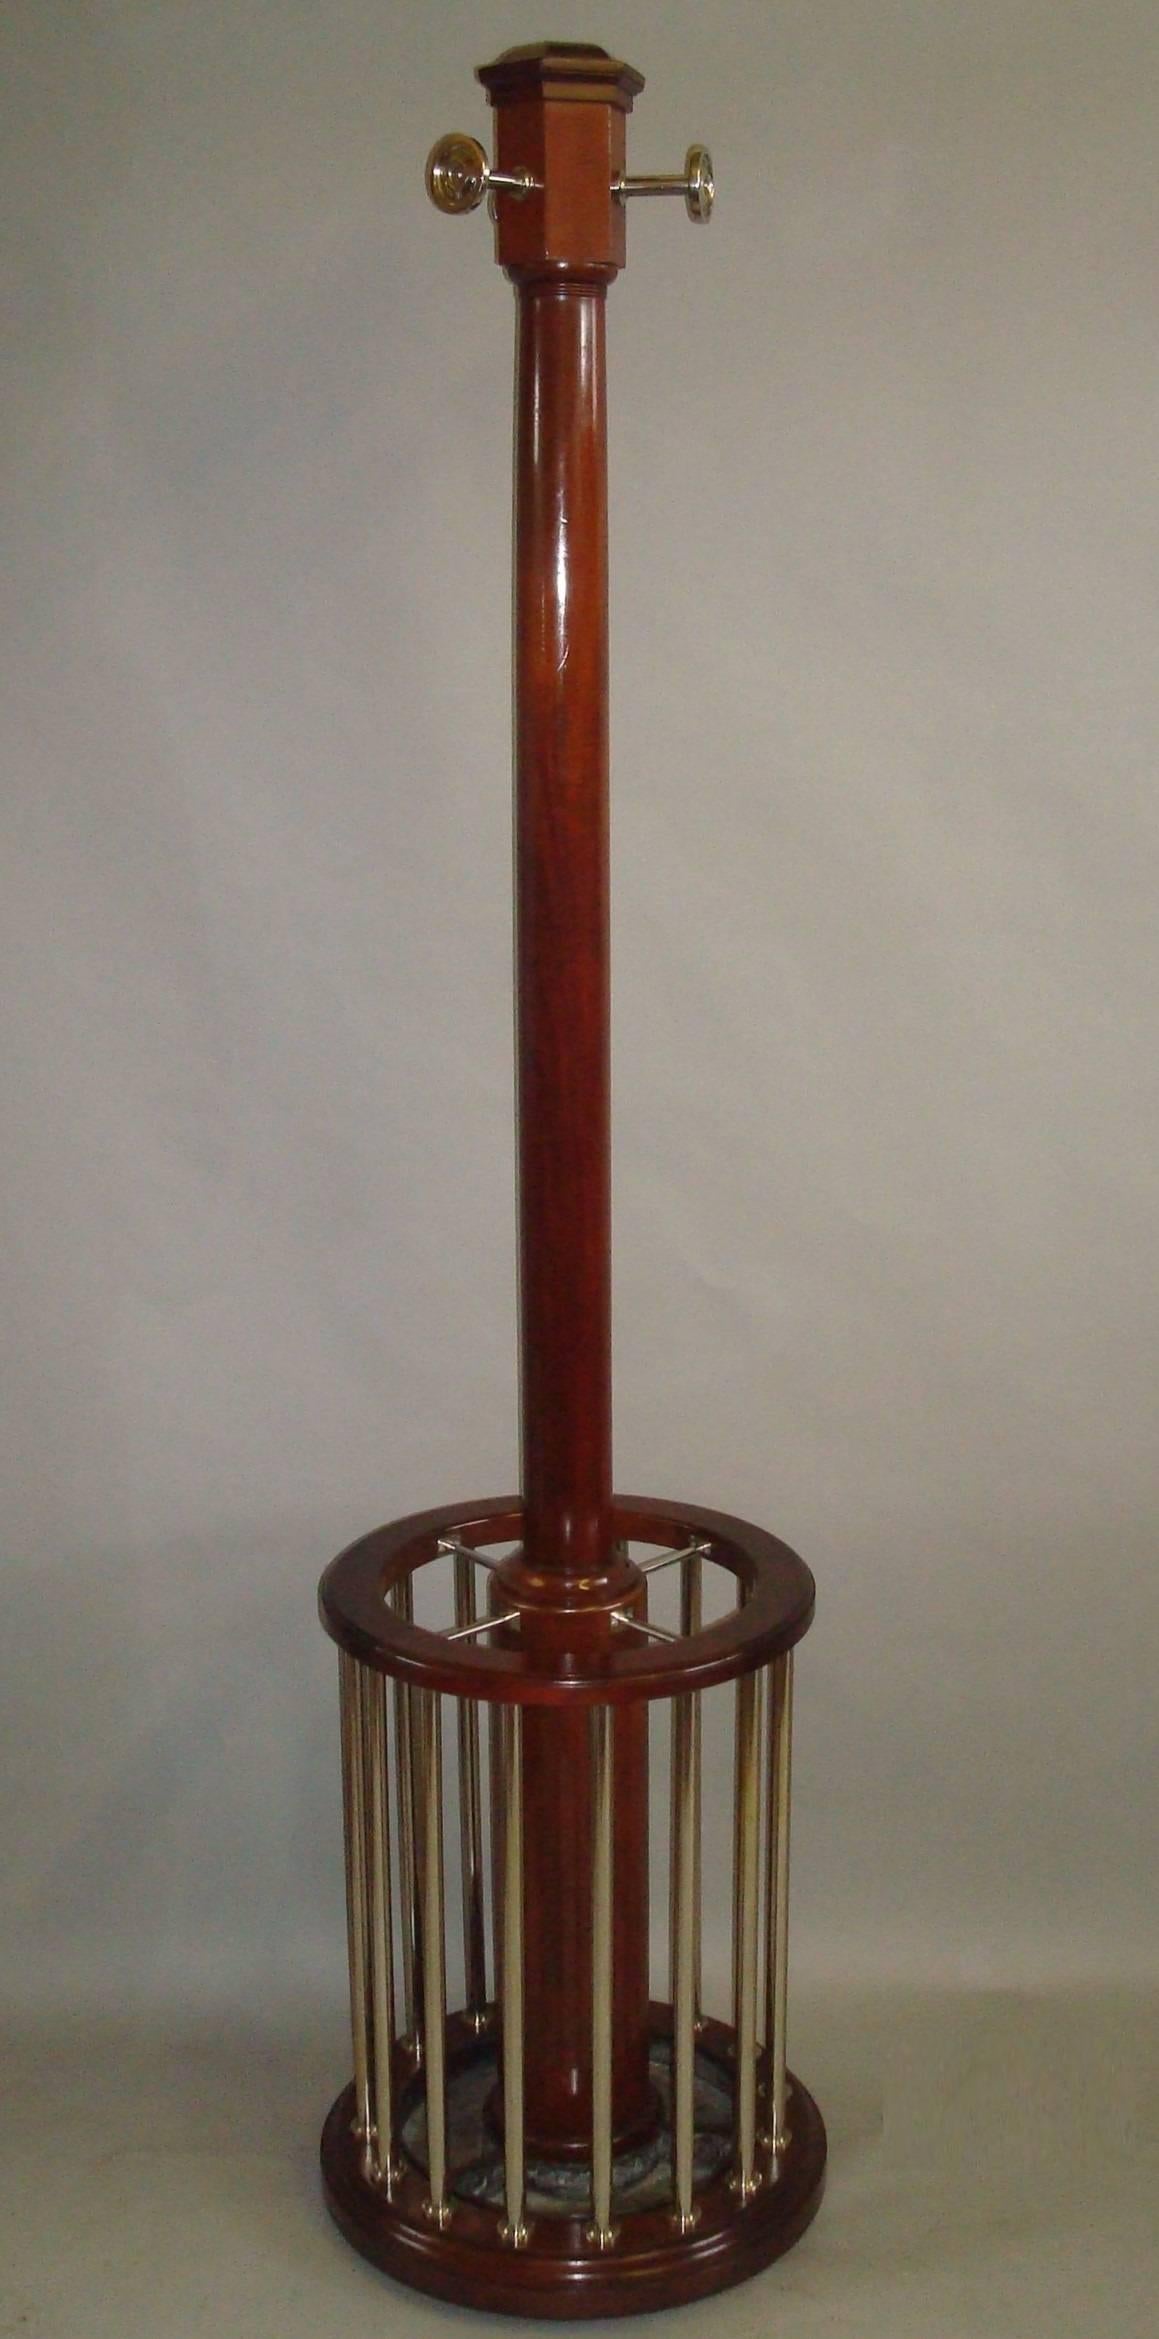 Stylish, early 20th century mahogany and chrome circular hall stand; for hats, coats, stick and umbrellas. In the Art Deco manner and of unusual and very stylish design.

The bold mahogany central column headed with a hexagonal moulded capital